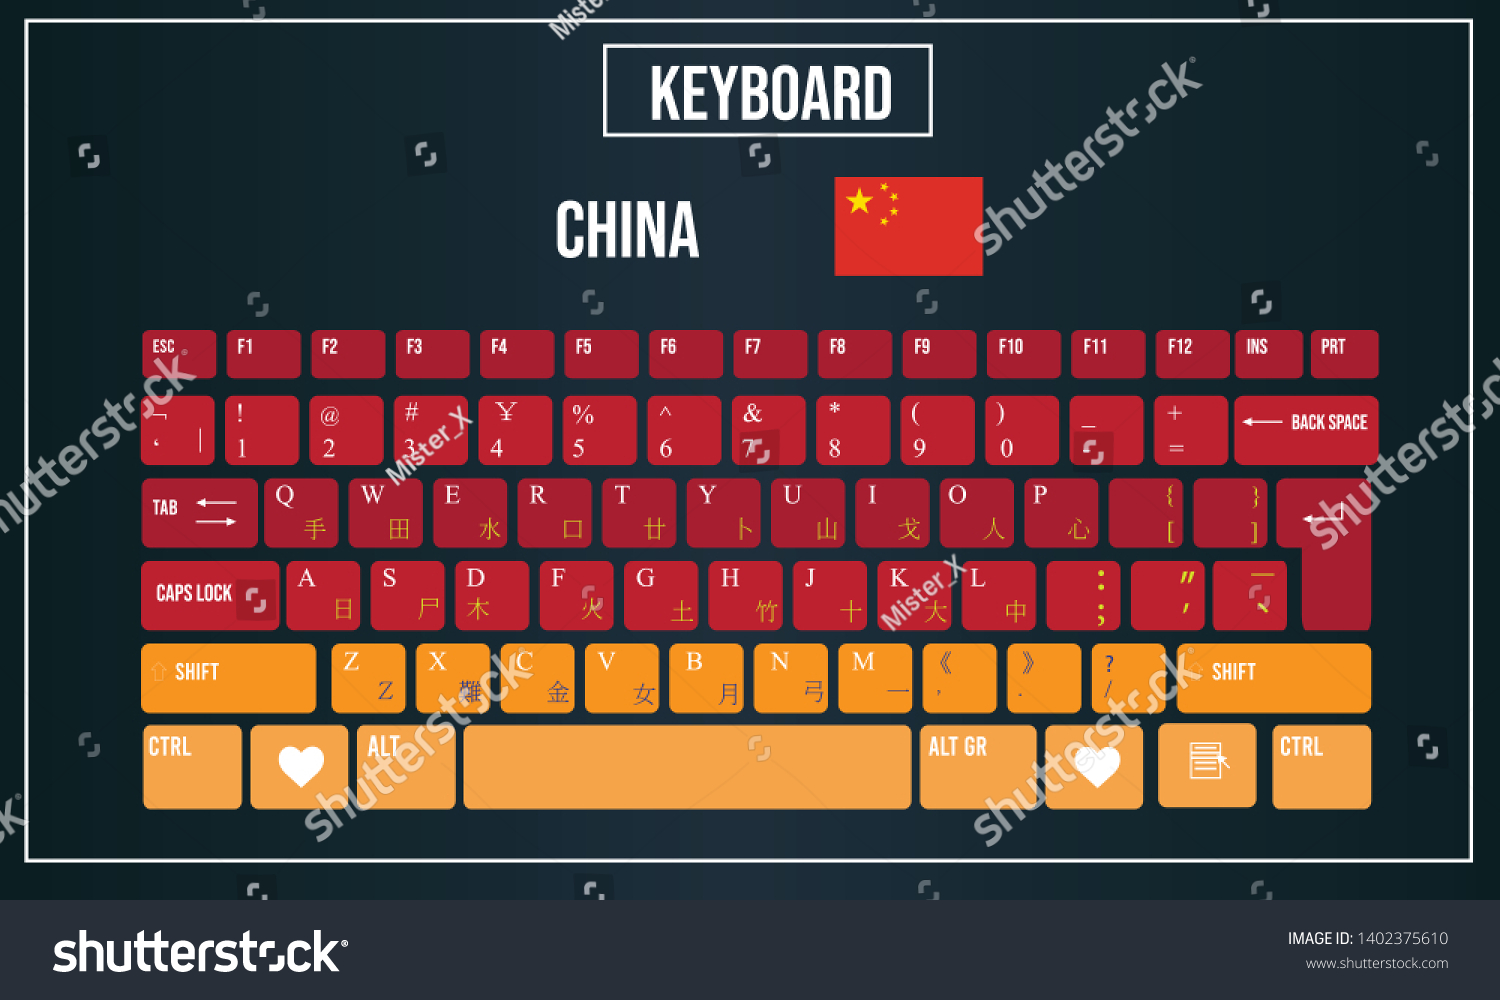 413 Chinese keyboard Stock Illustrations, Images & Vectors | Shutterstock